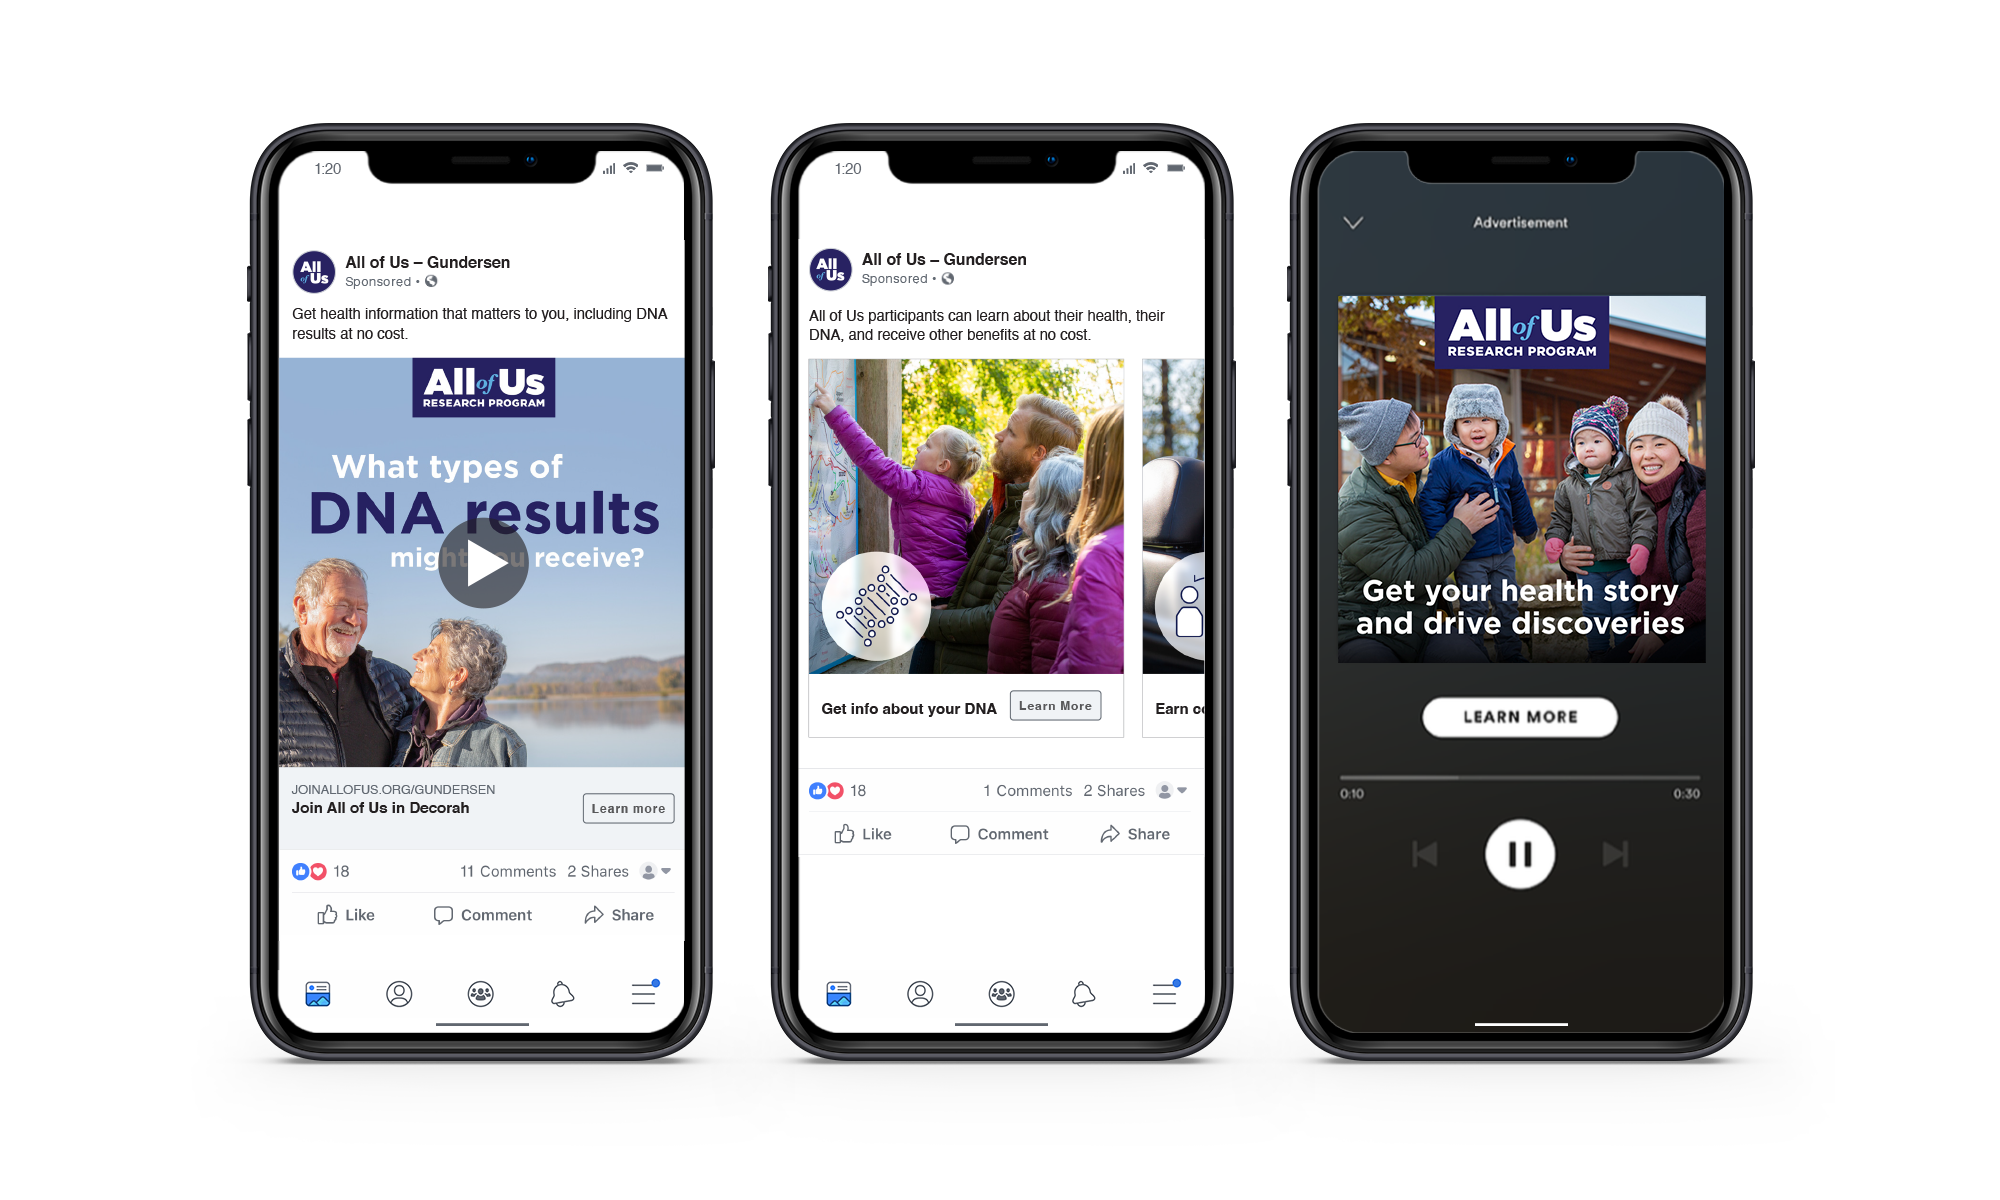 Examples of All of Us Facebook ads created by Vendi and displayed on three mobile phone screens